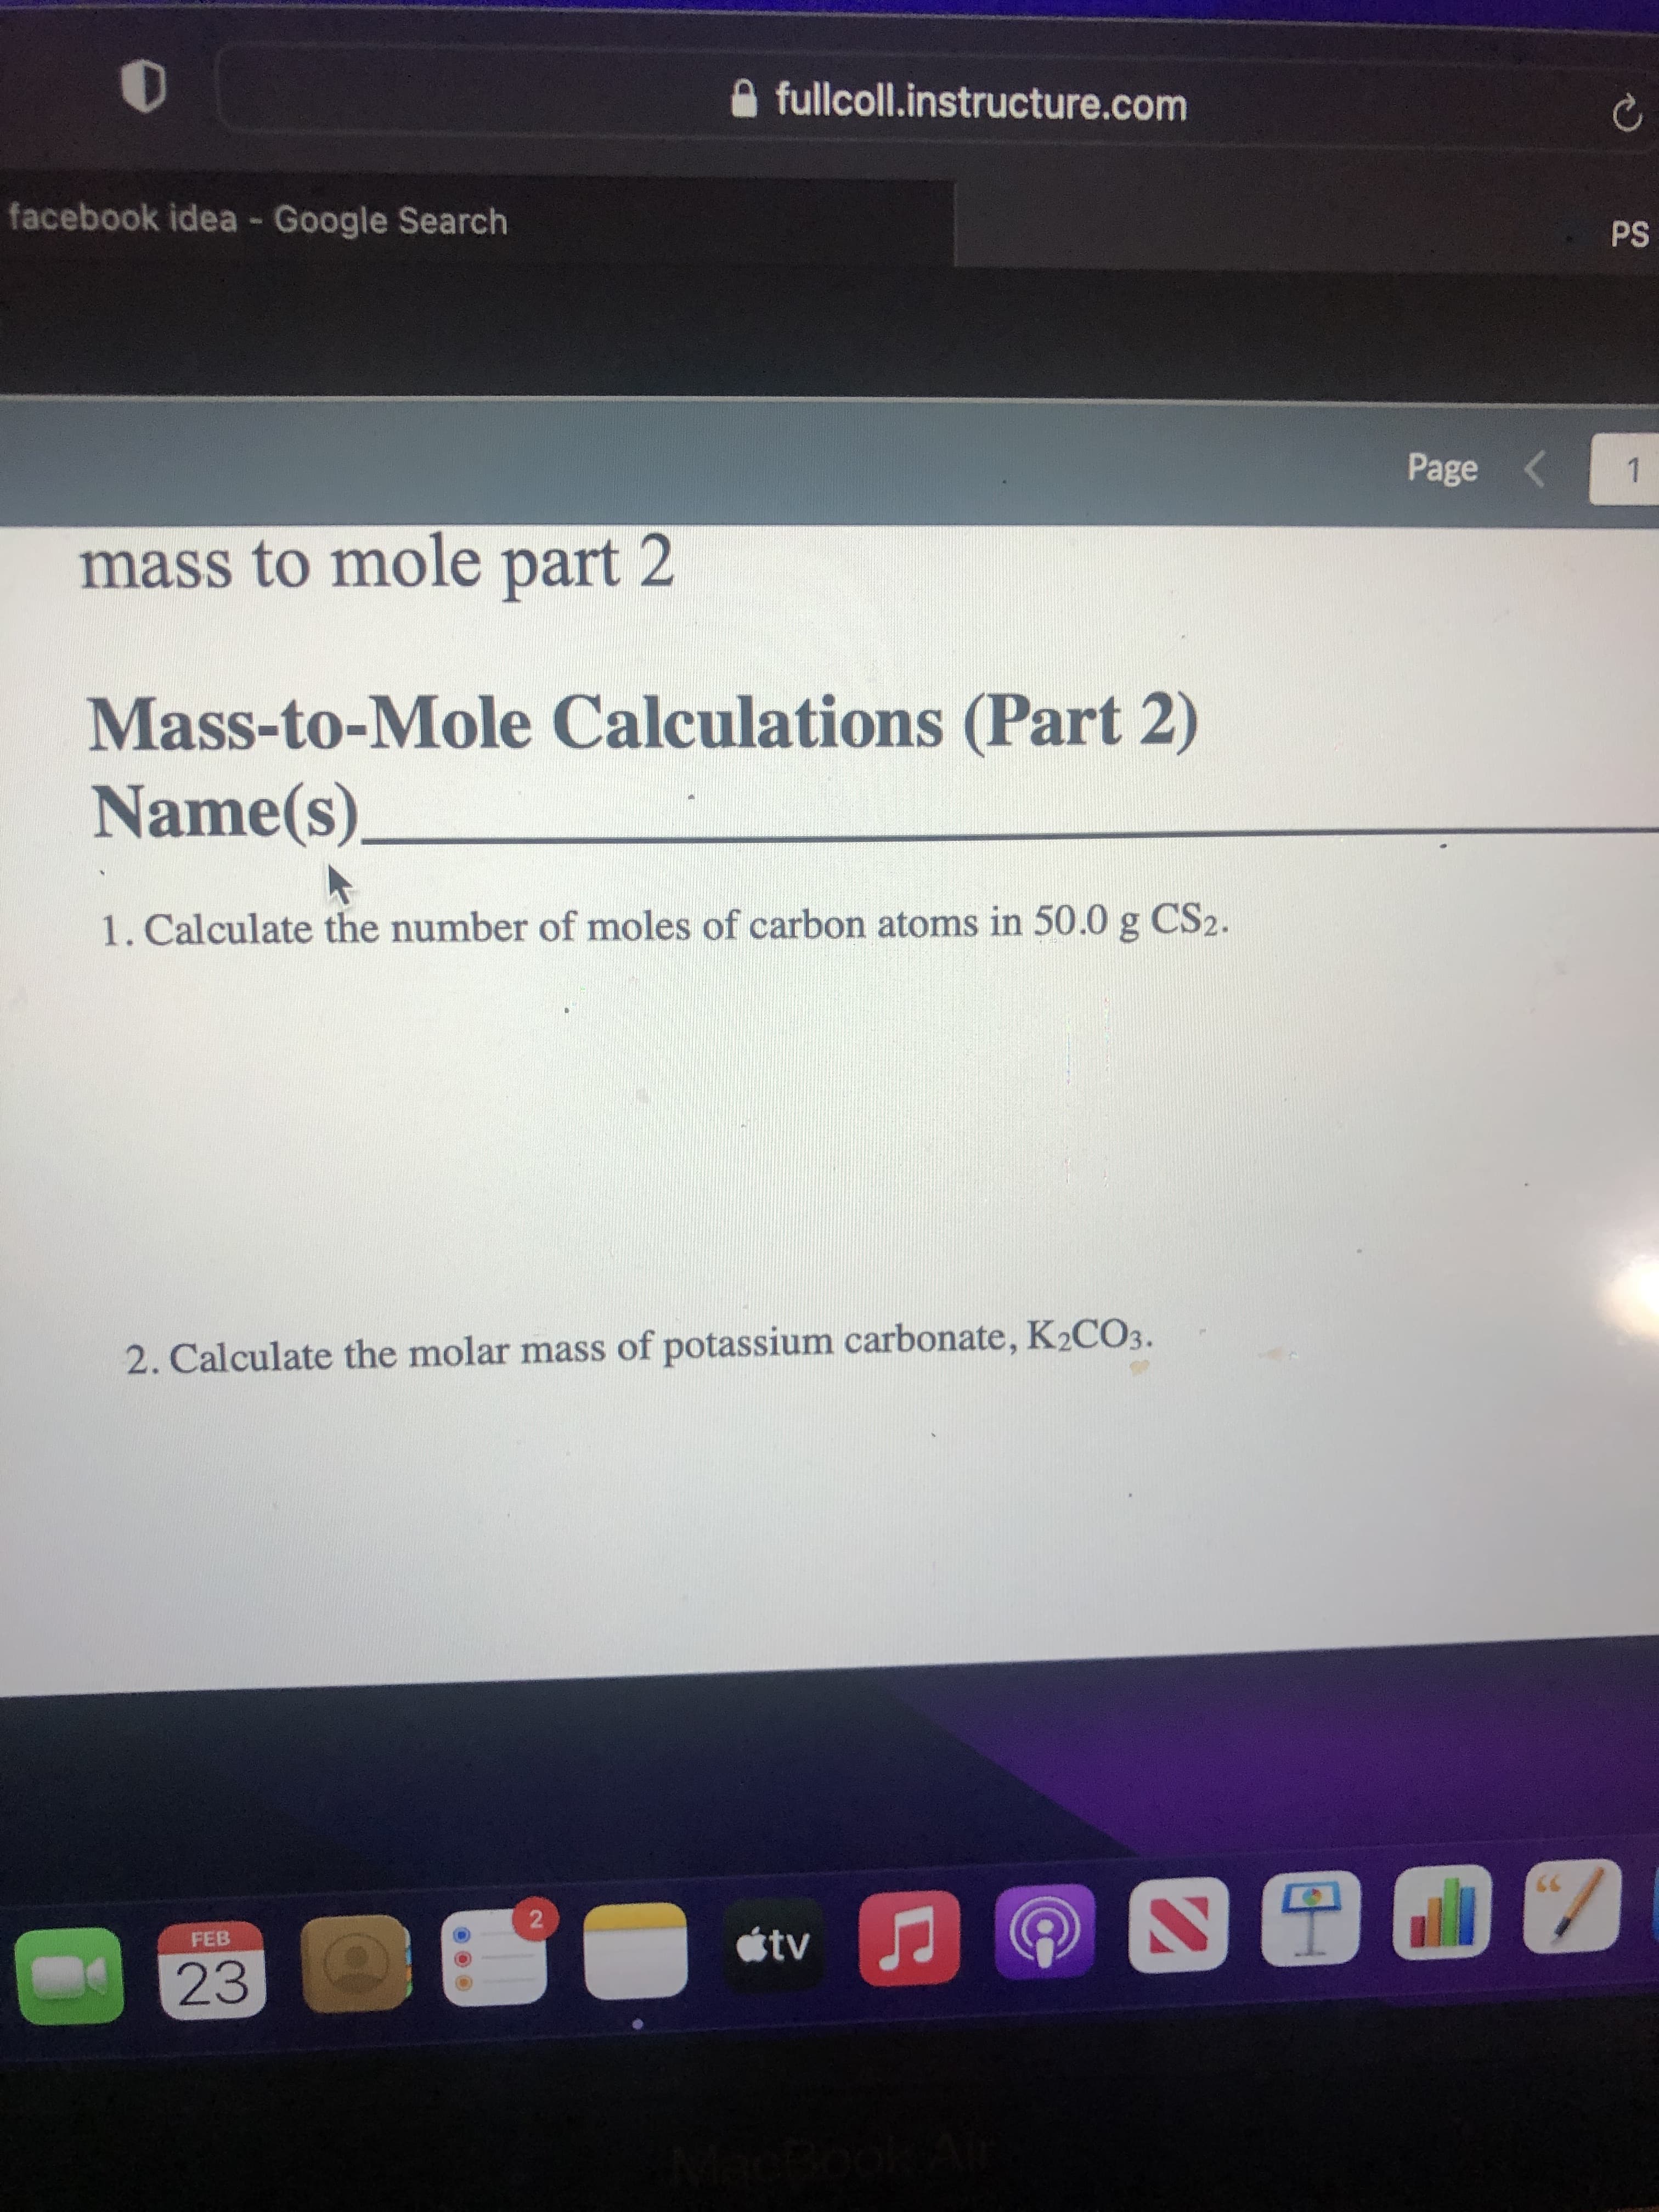 2.
fullcoll.instructure.com
facebook idea - Google Search
Sd
Page <
1.
mass to mole part 2
Mass-to-Mole Calculations (Part 2)
Name(s).
1. Calculate the number of moles of carbon atoms in 50.0 g CS2.
2. Calculate the molar mass of potassium carbonate, K2CO3.
tv
FEB
23
